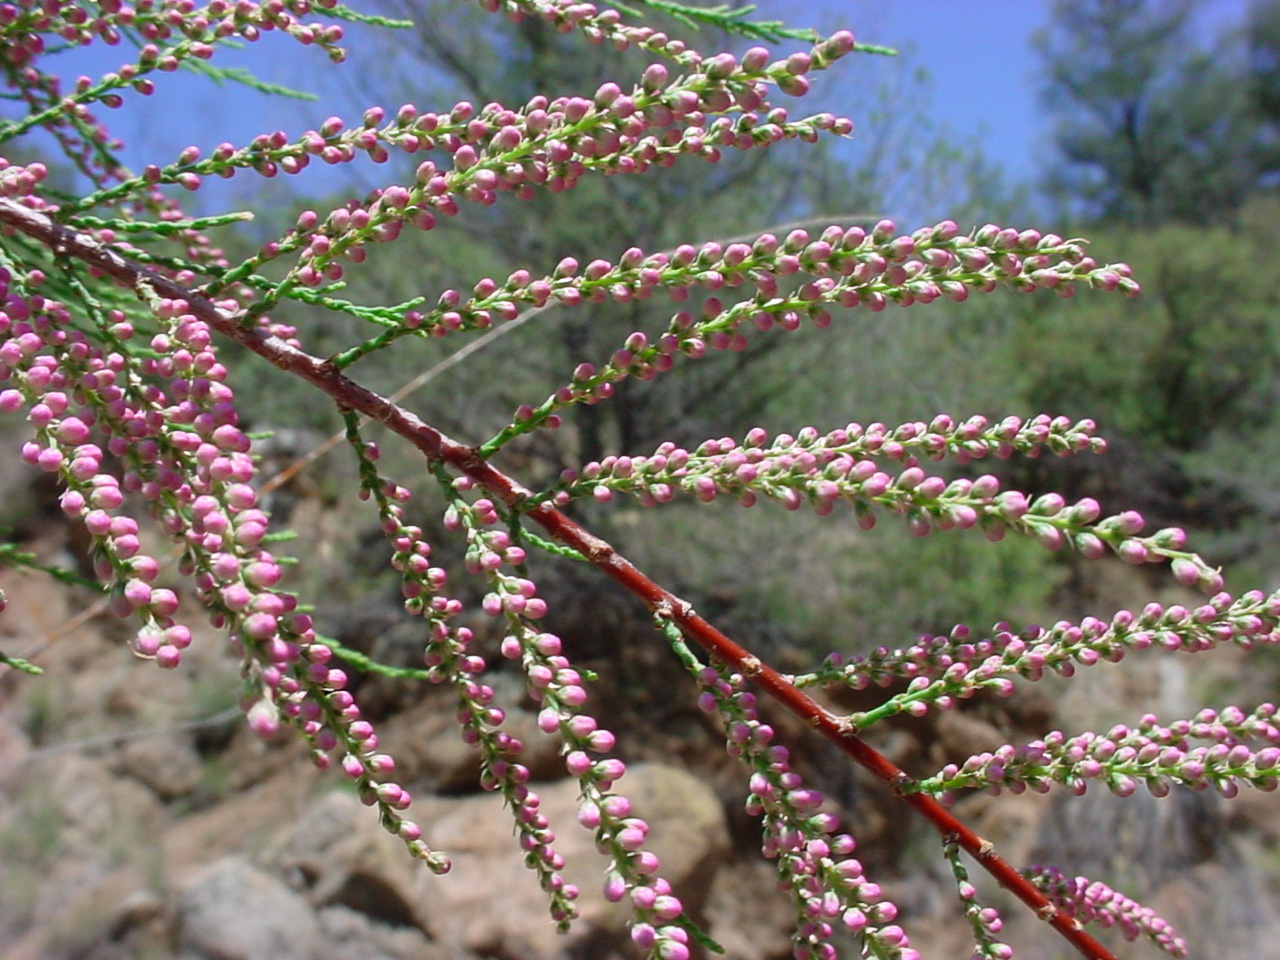 The flower clusters make an open V shape on the twig